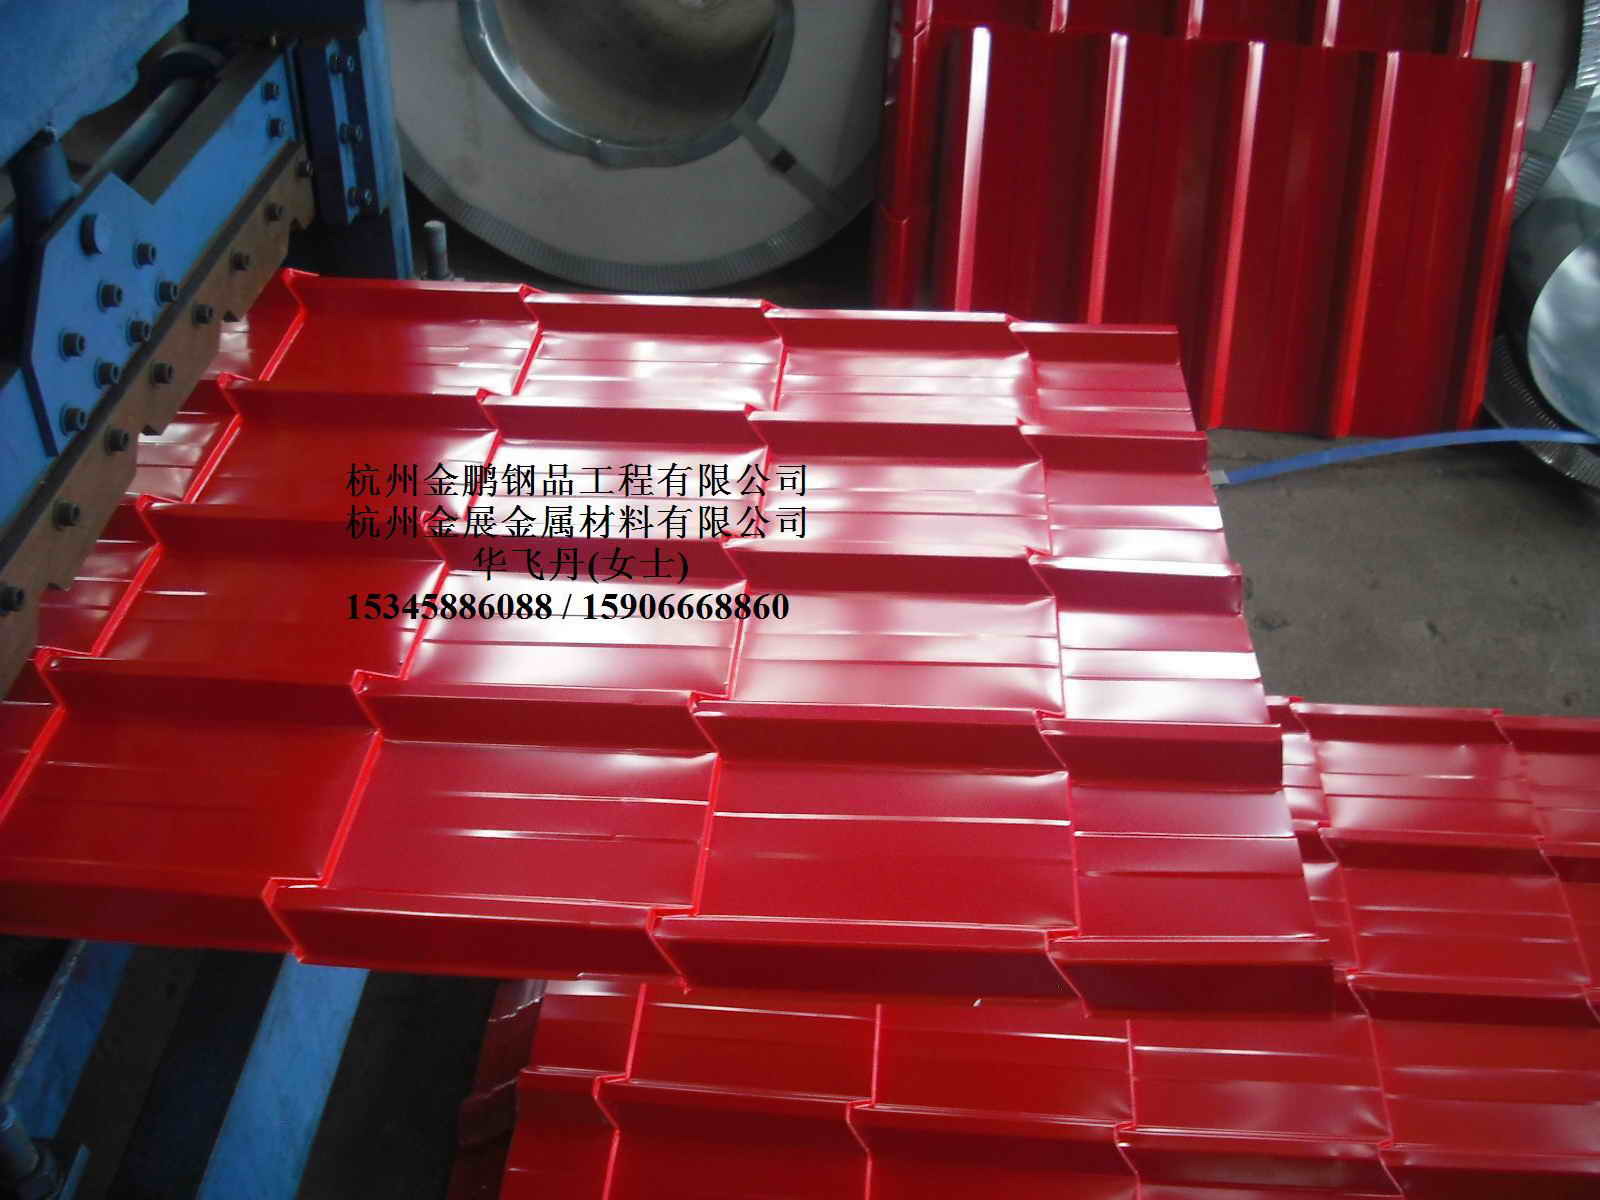 Roofing Sheet (YX25-210-840/1050)